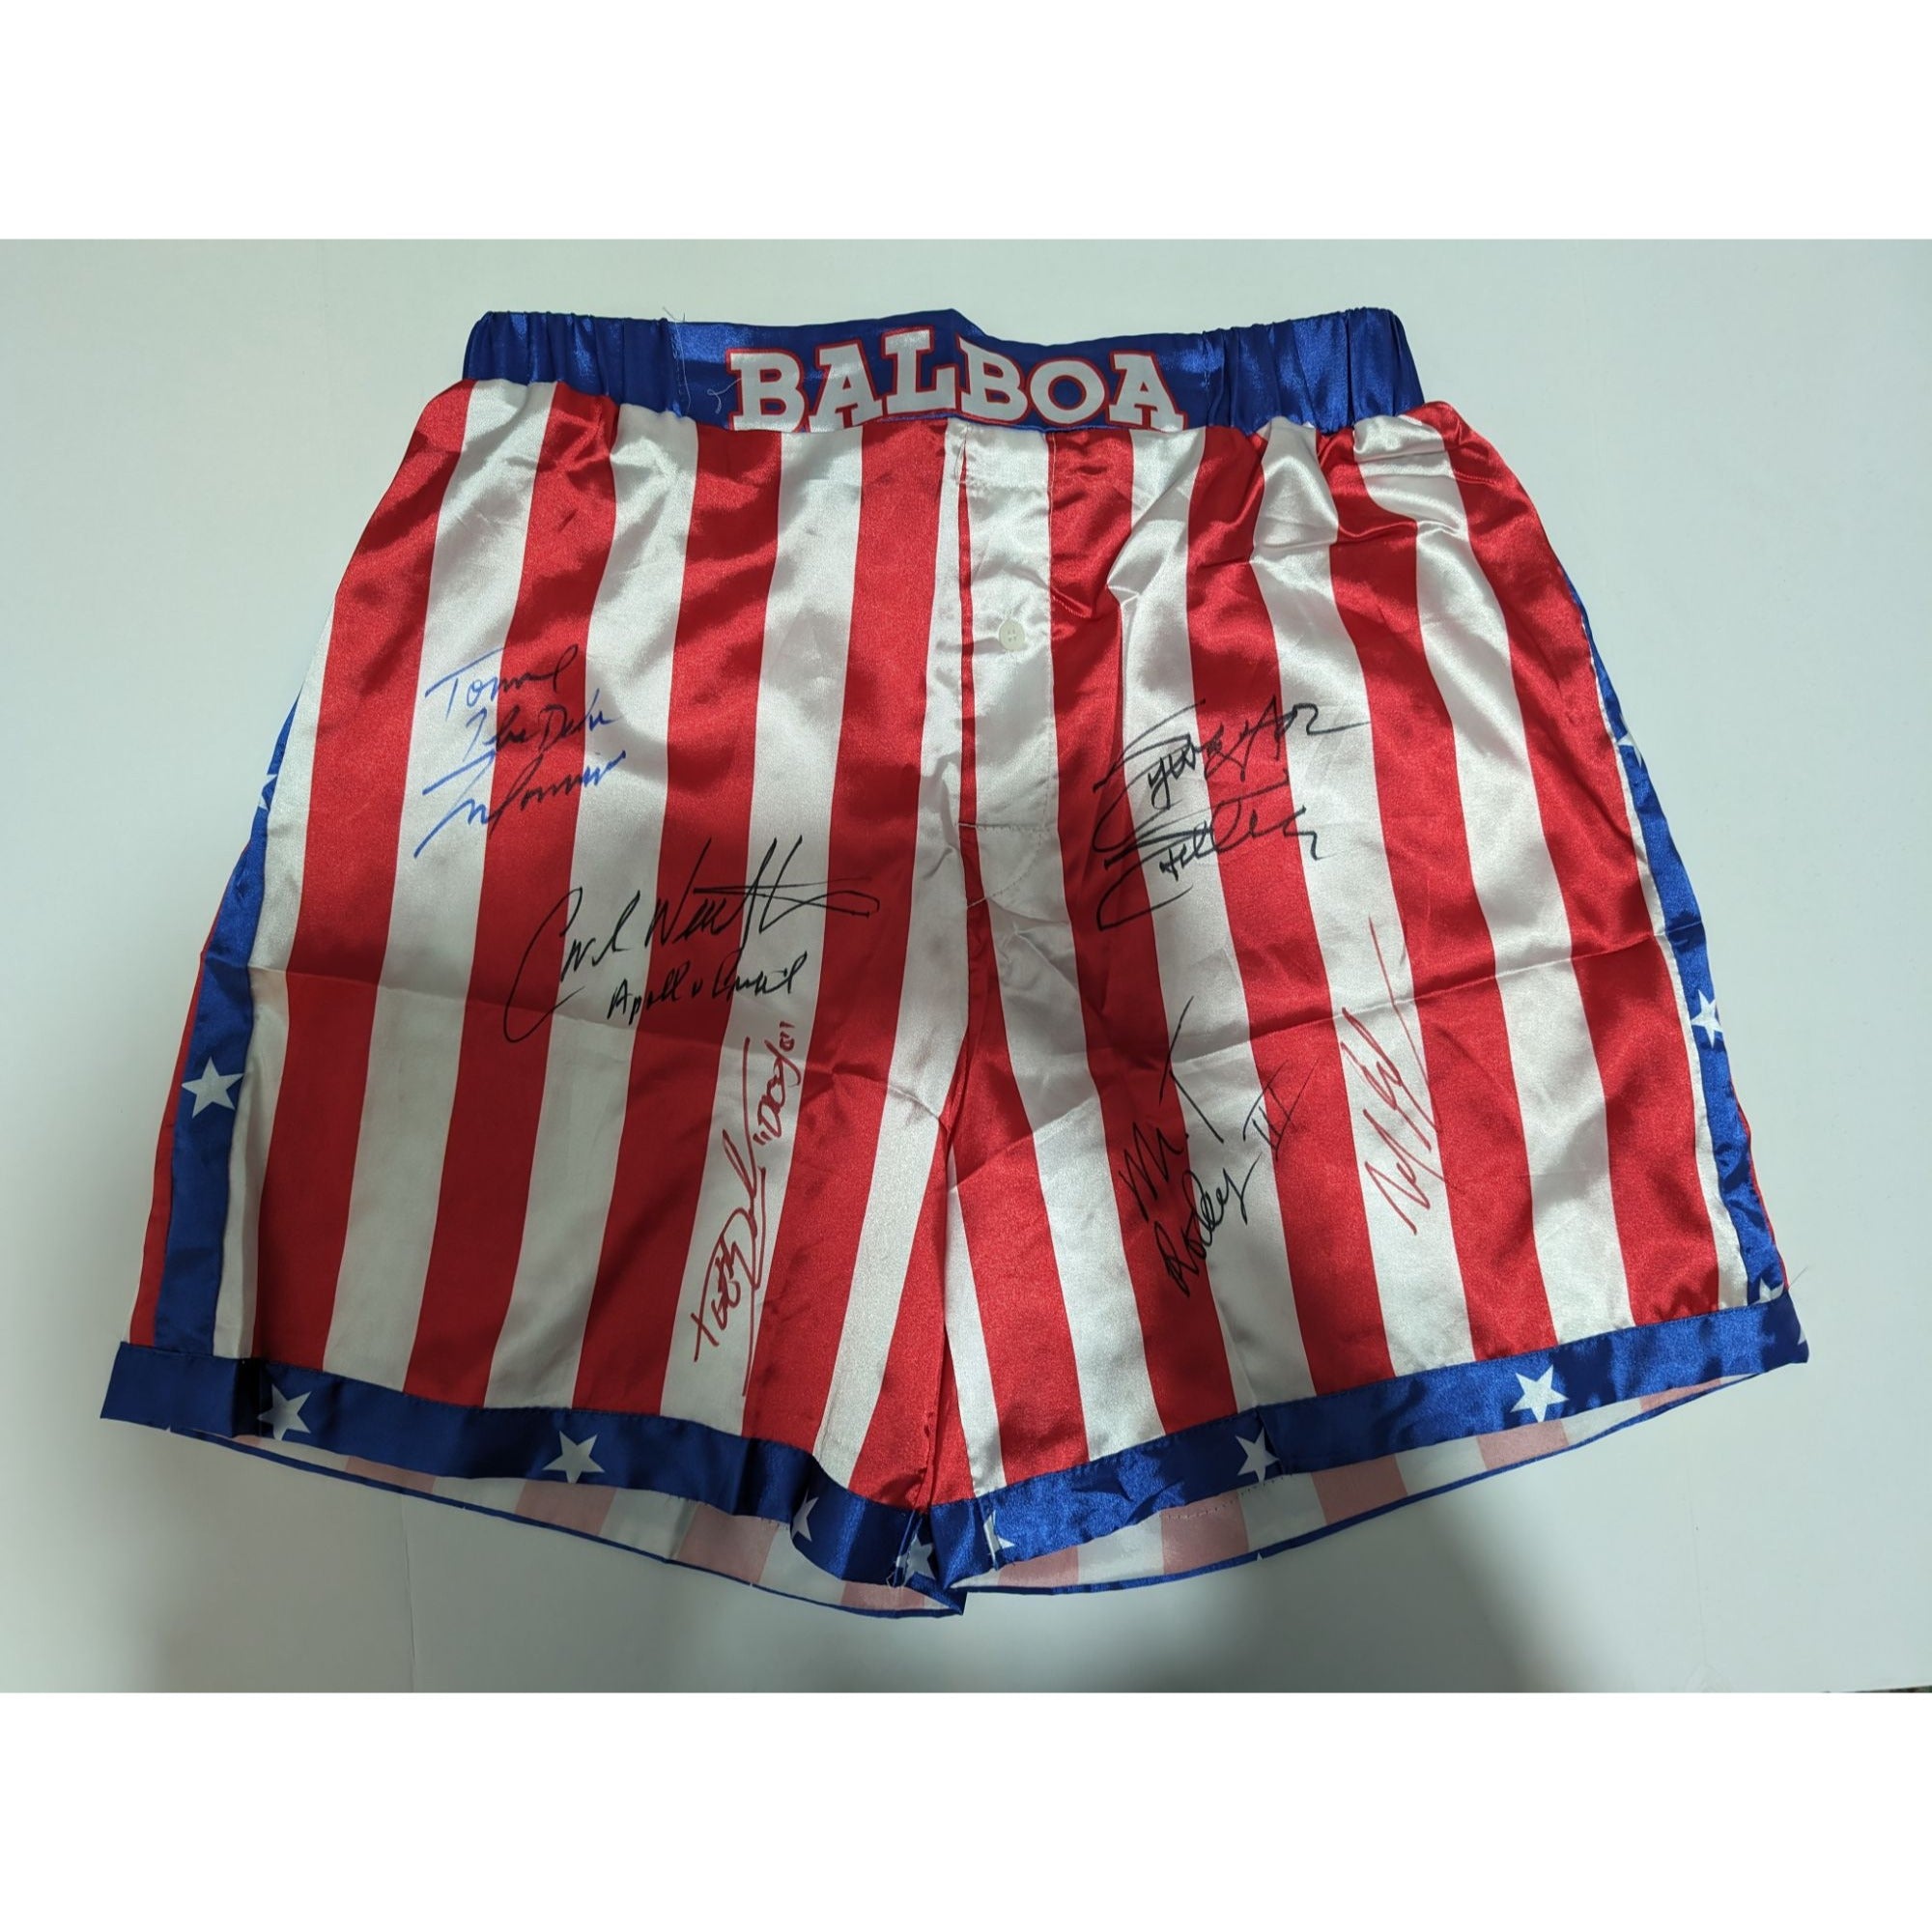 Sylvester Stallone Dolph Lundgren Carl Weathers Mr T Tommy Morrison and Michael B Jordan boxing shorts signed with proof